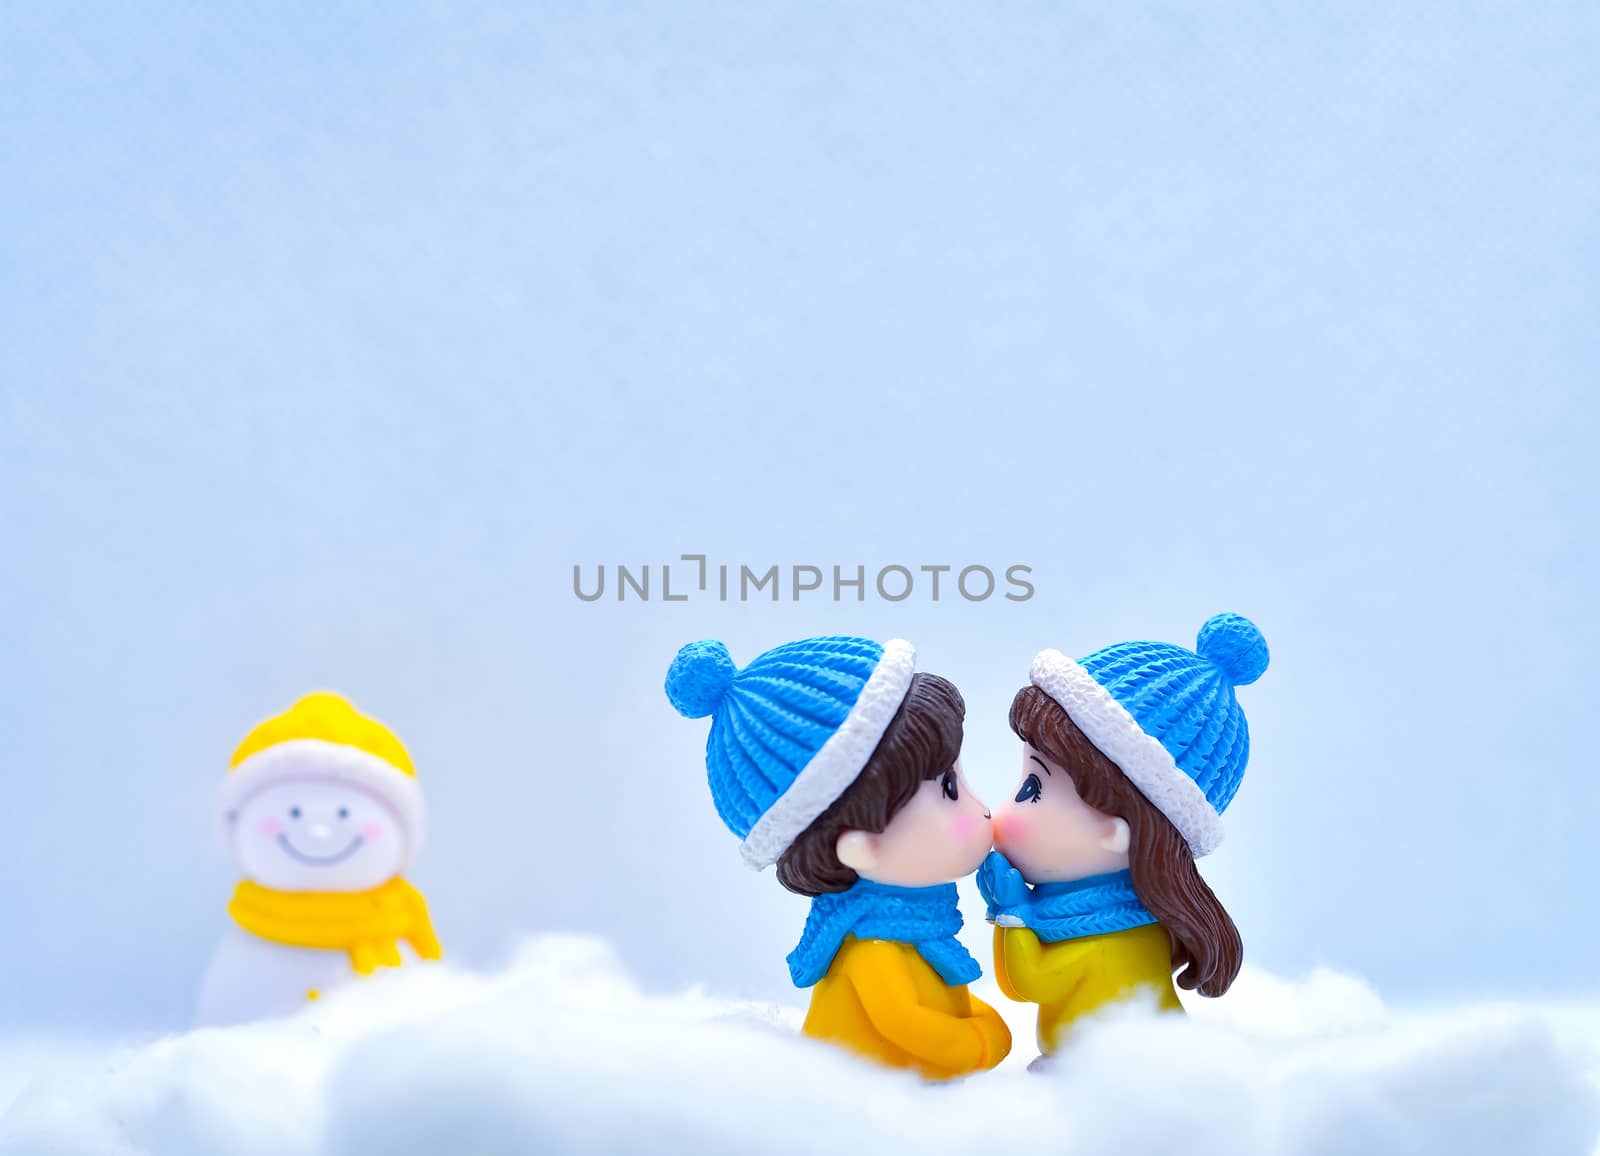 Tourism and travel concept: Miniature people kissing each other in winter snow with little snowman in the background by rkbalaji